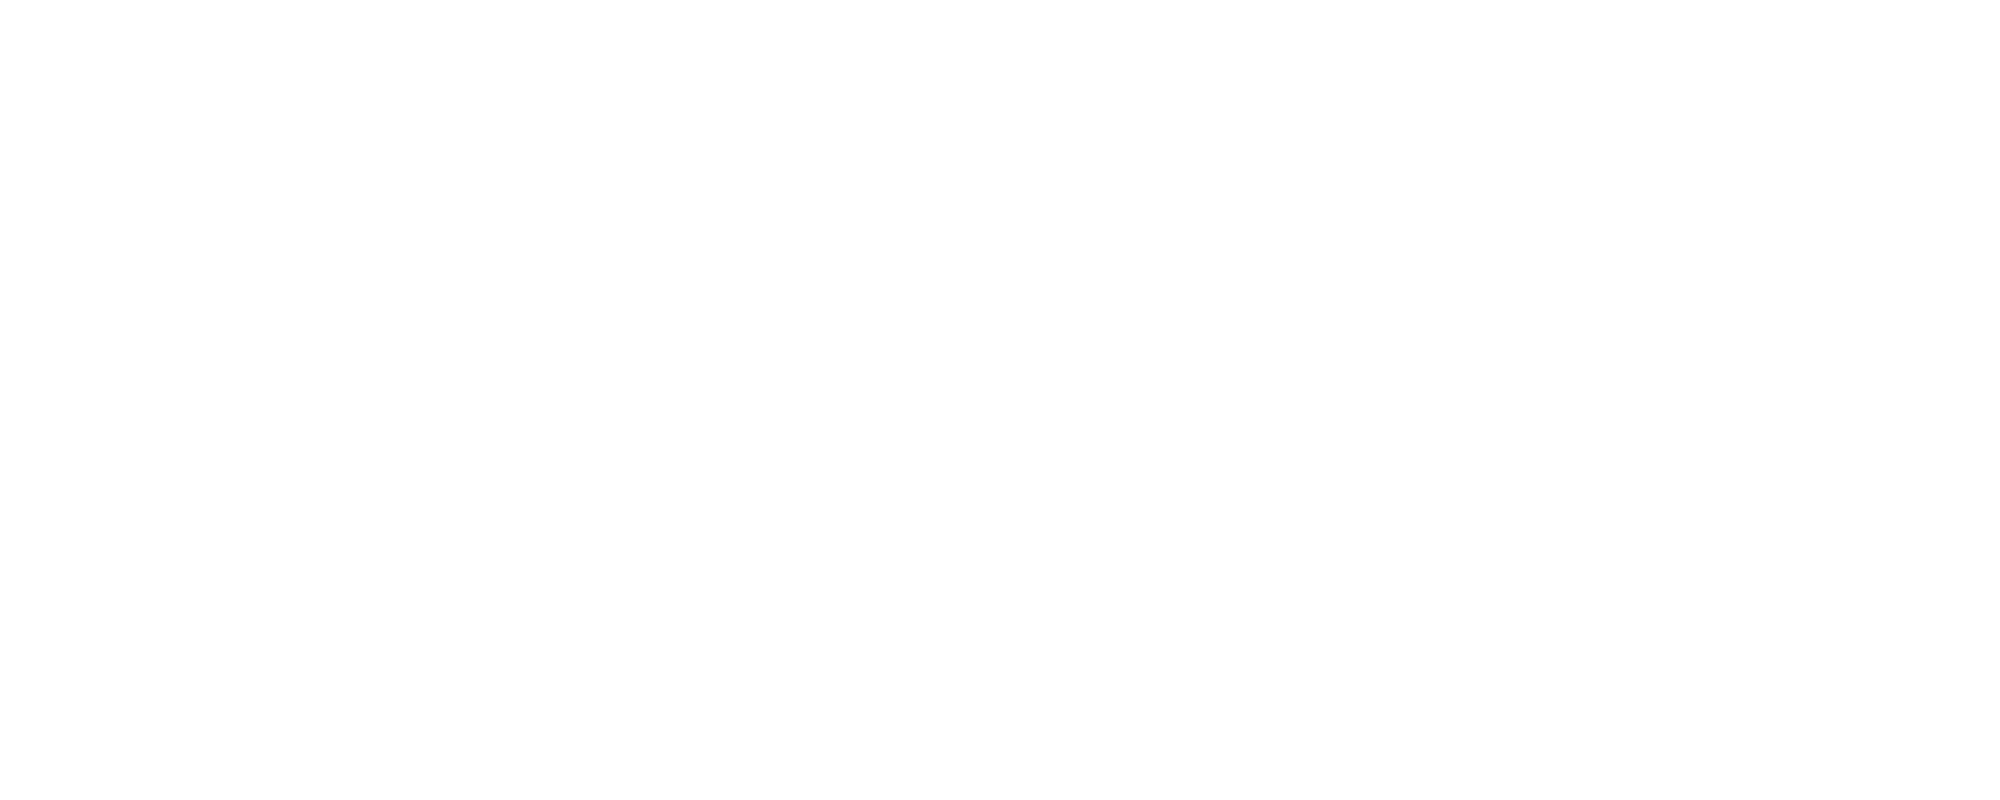 OVATION TV’S STATEMENT ON BROADWAY REOPENING